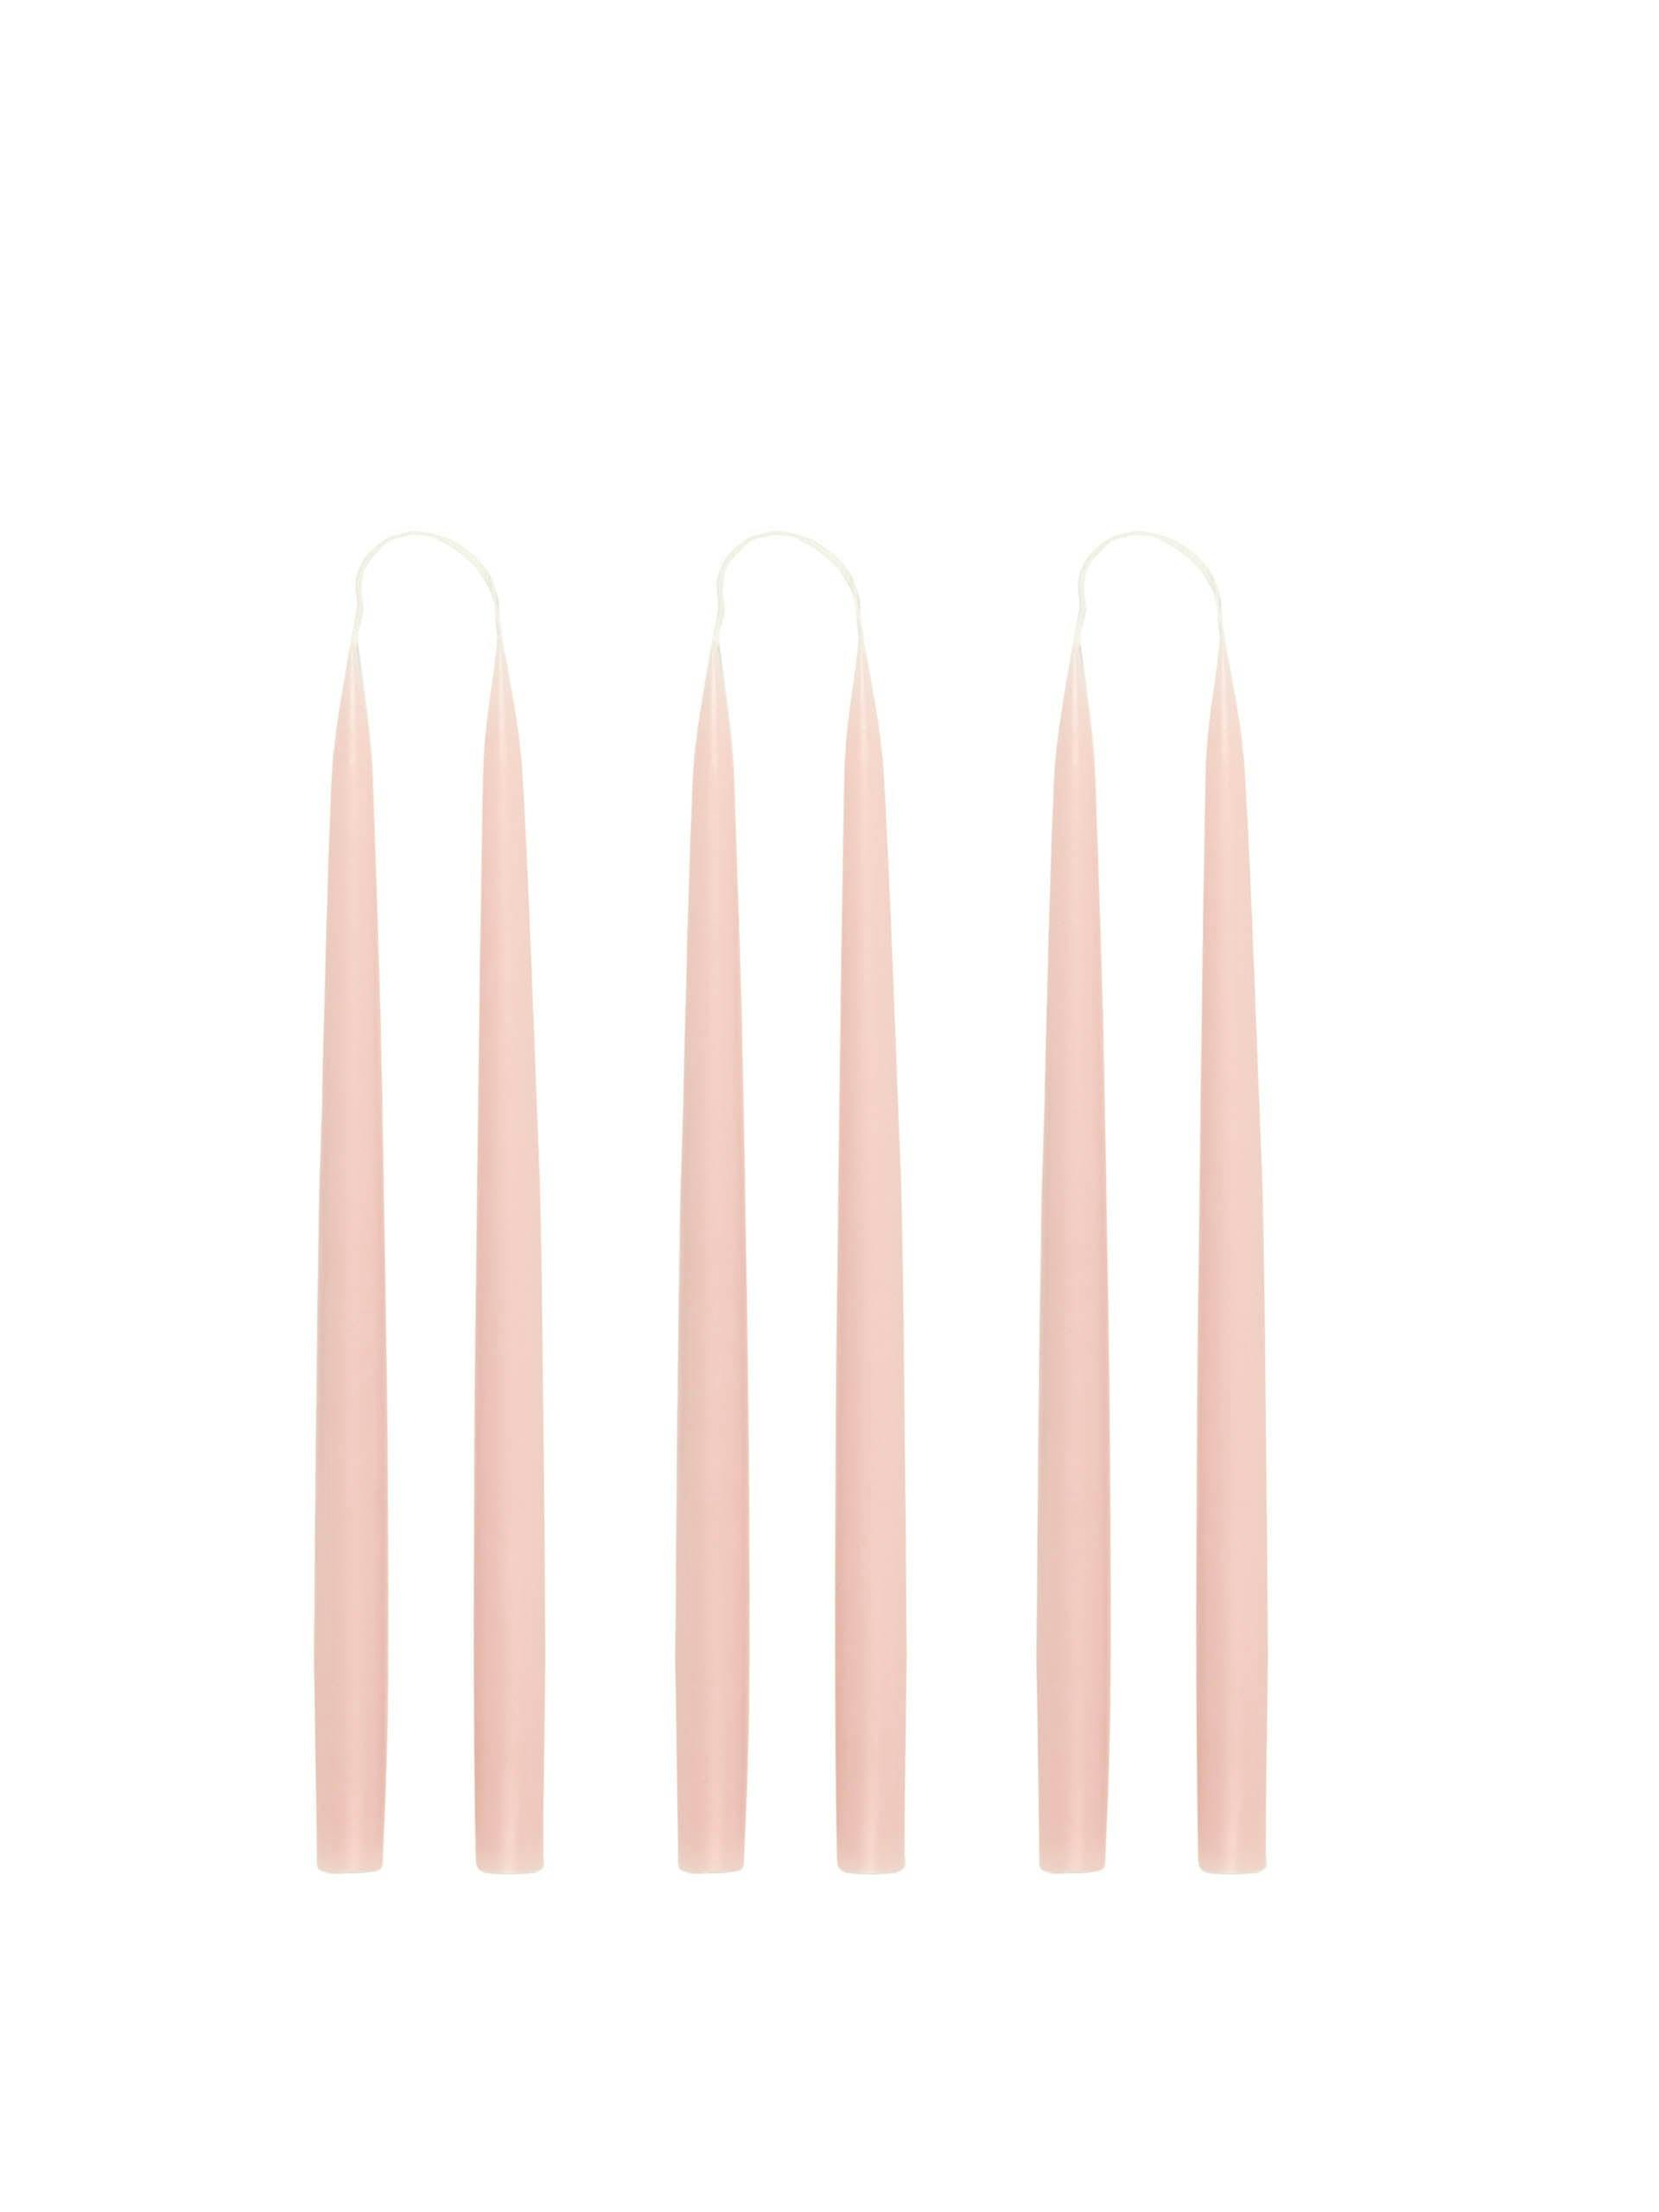 Danish taper candles in powder pink (set of 6)